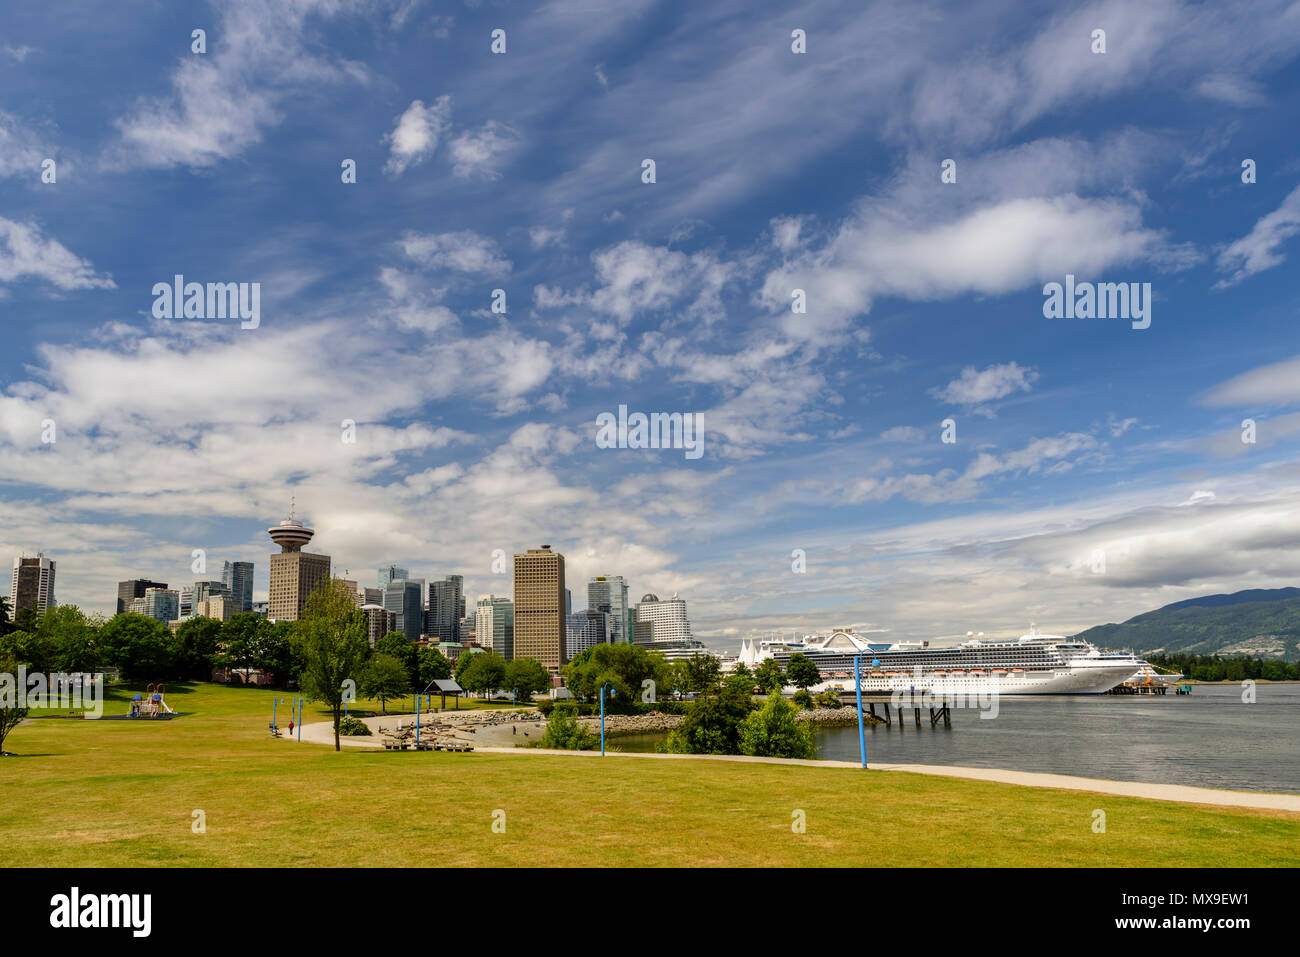 A summer day in a megalopolis city park with skyscrapers, a blue sky with clouds, a white ship, a blue ocean, mountains and green trees Stock Photo